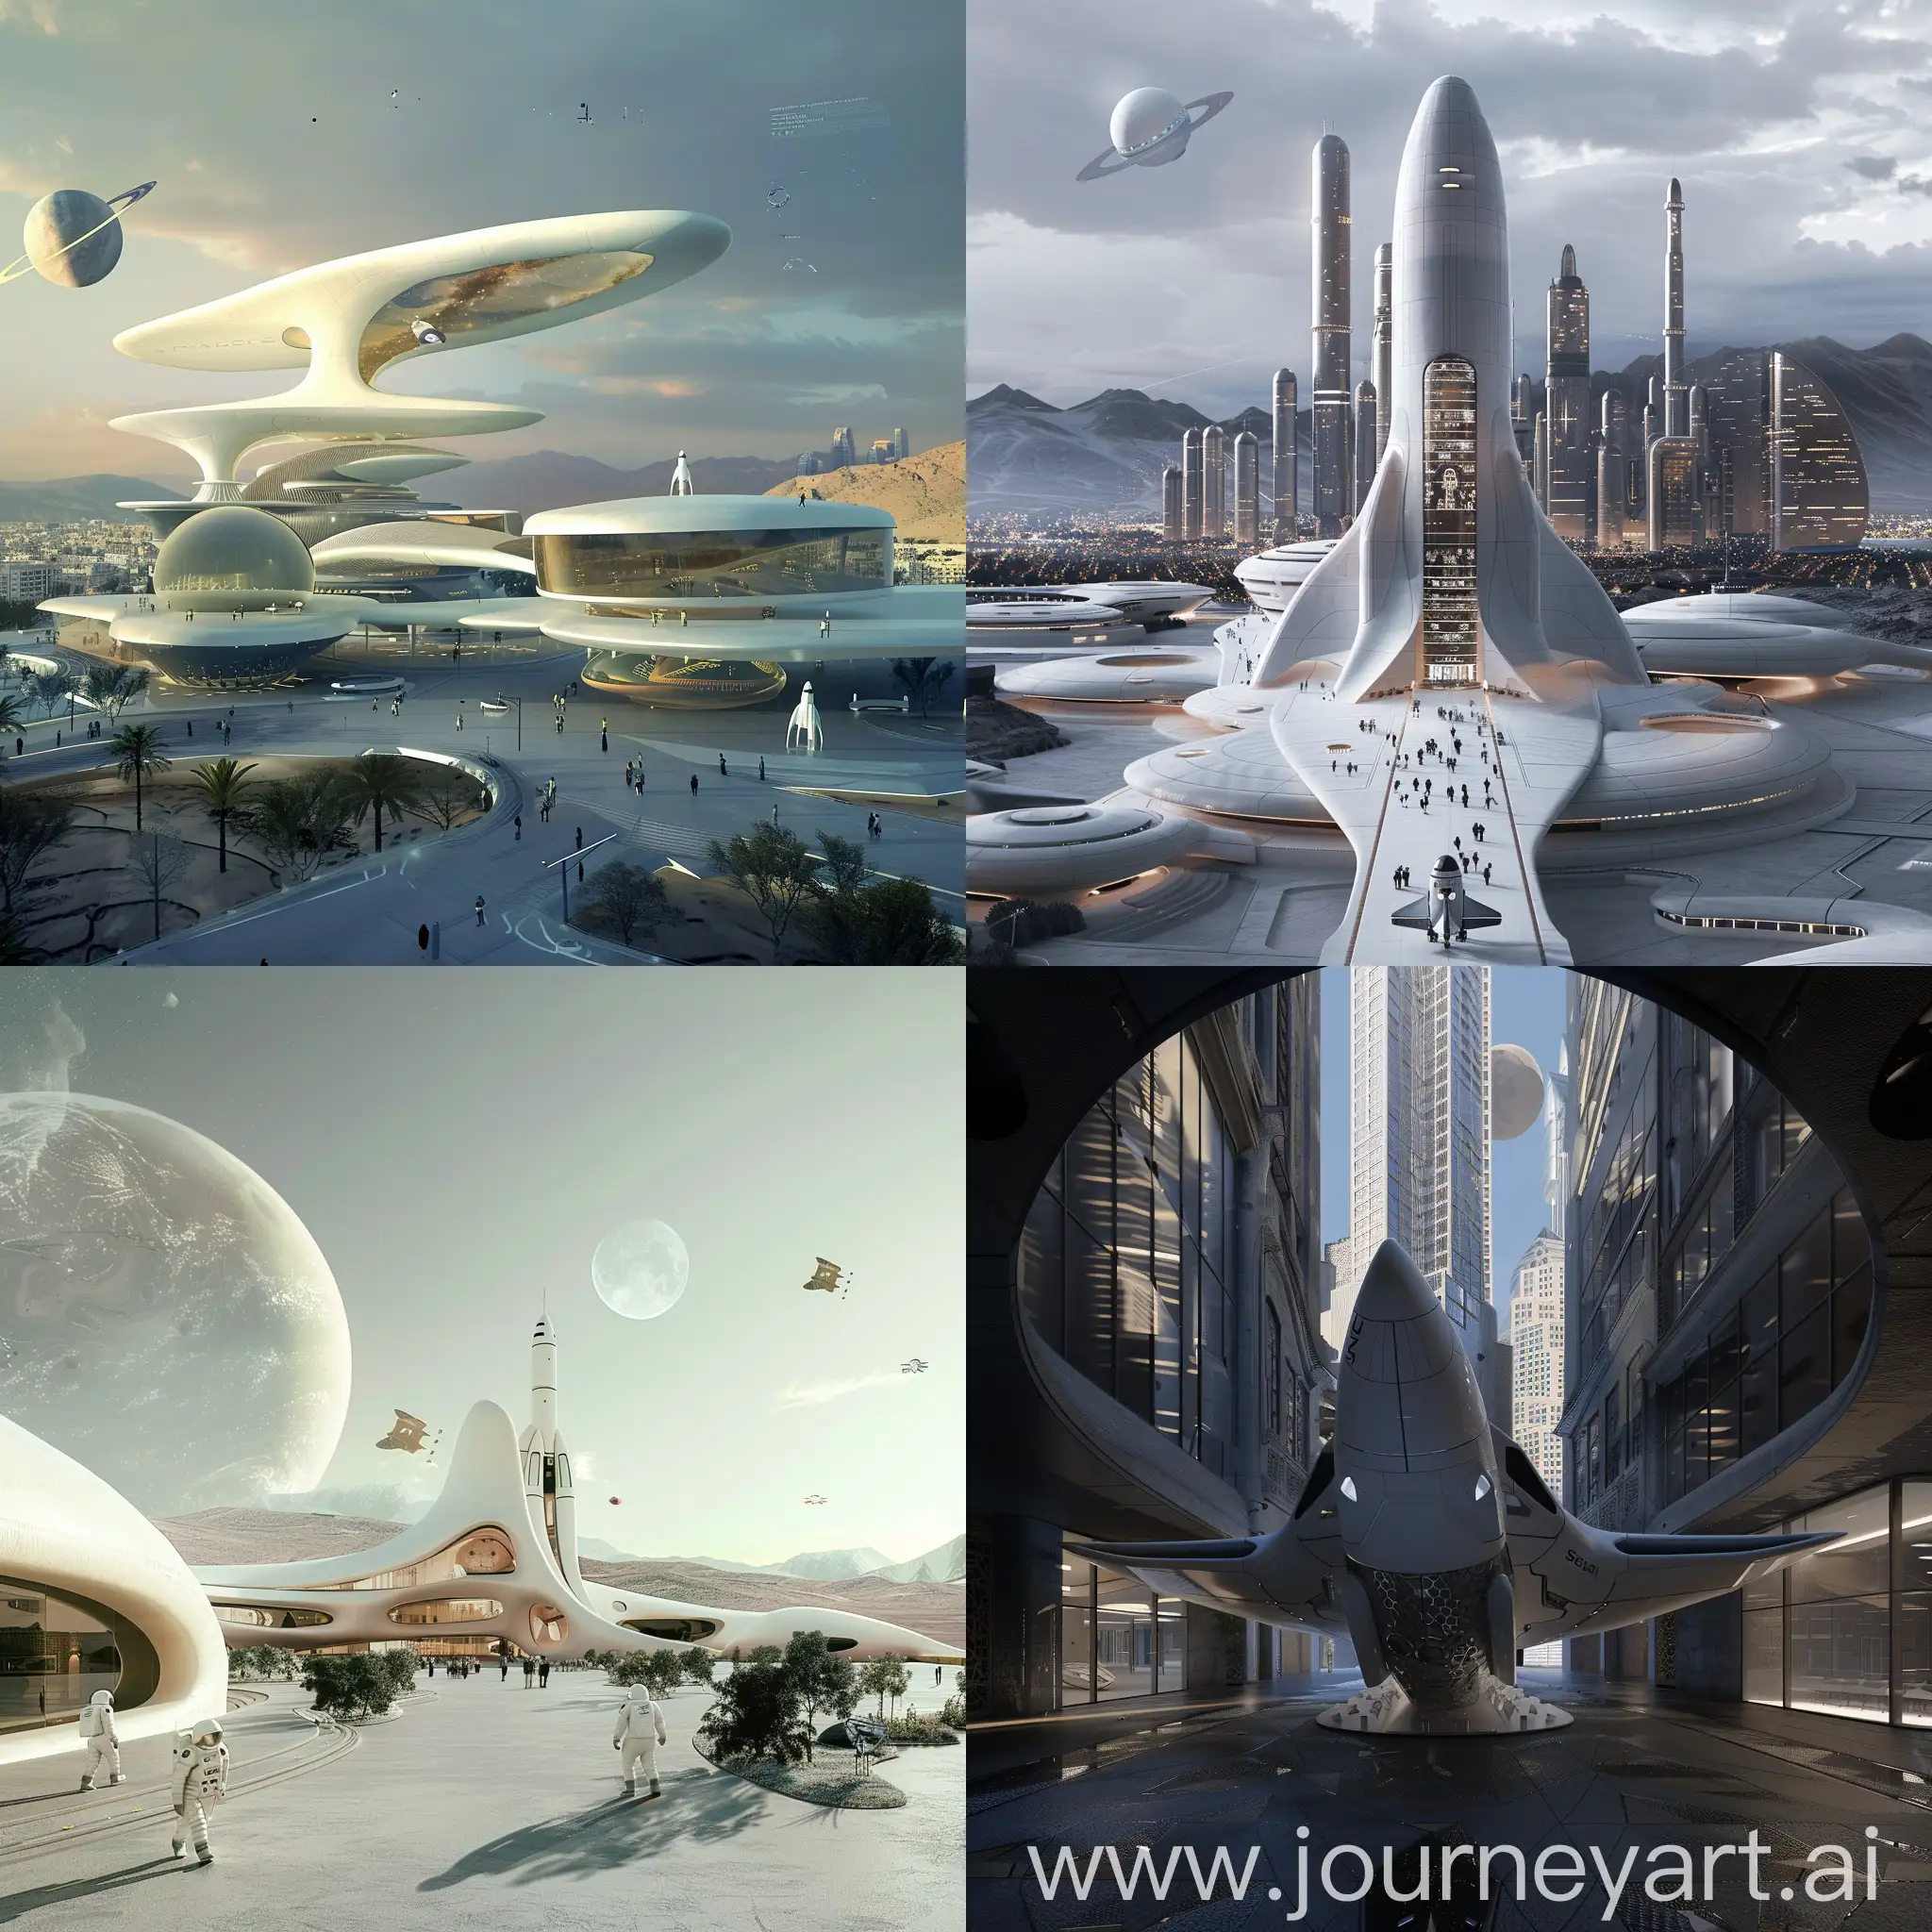 Design of a space museum in the middle of an architecturally aesthetic city.